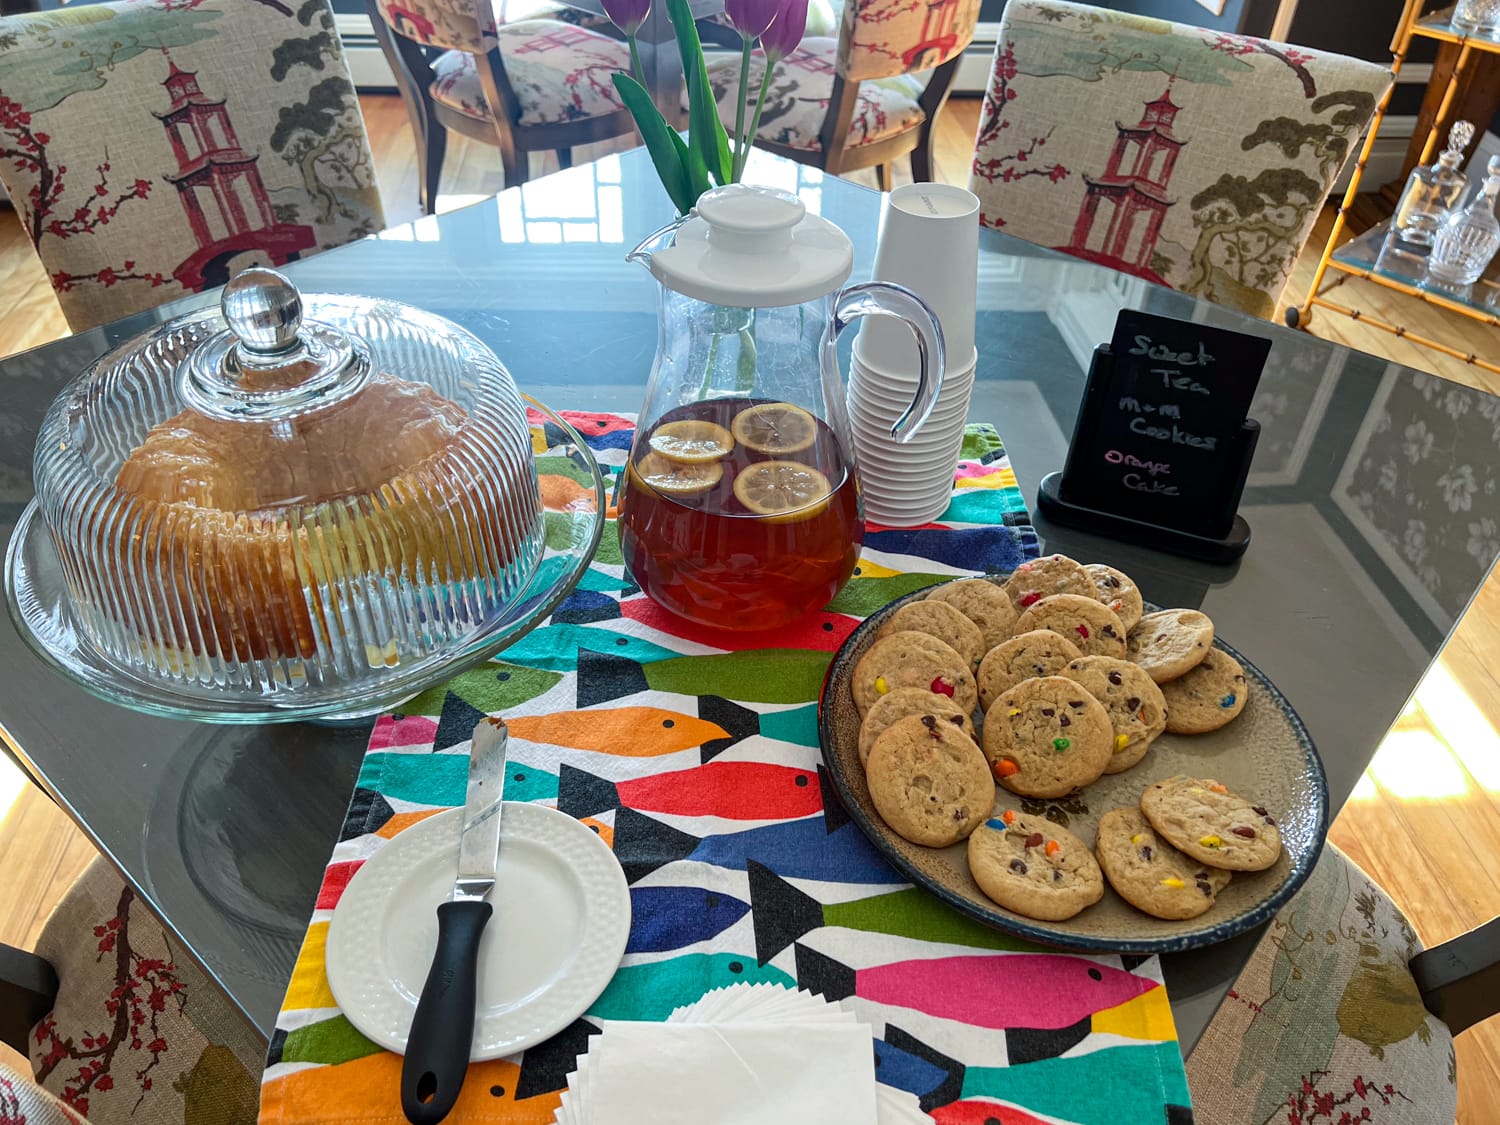 Afternoon iced tea, cookies, and cake